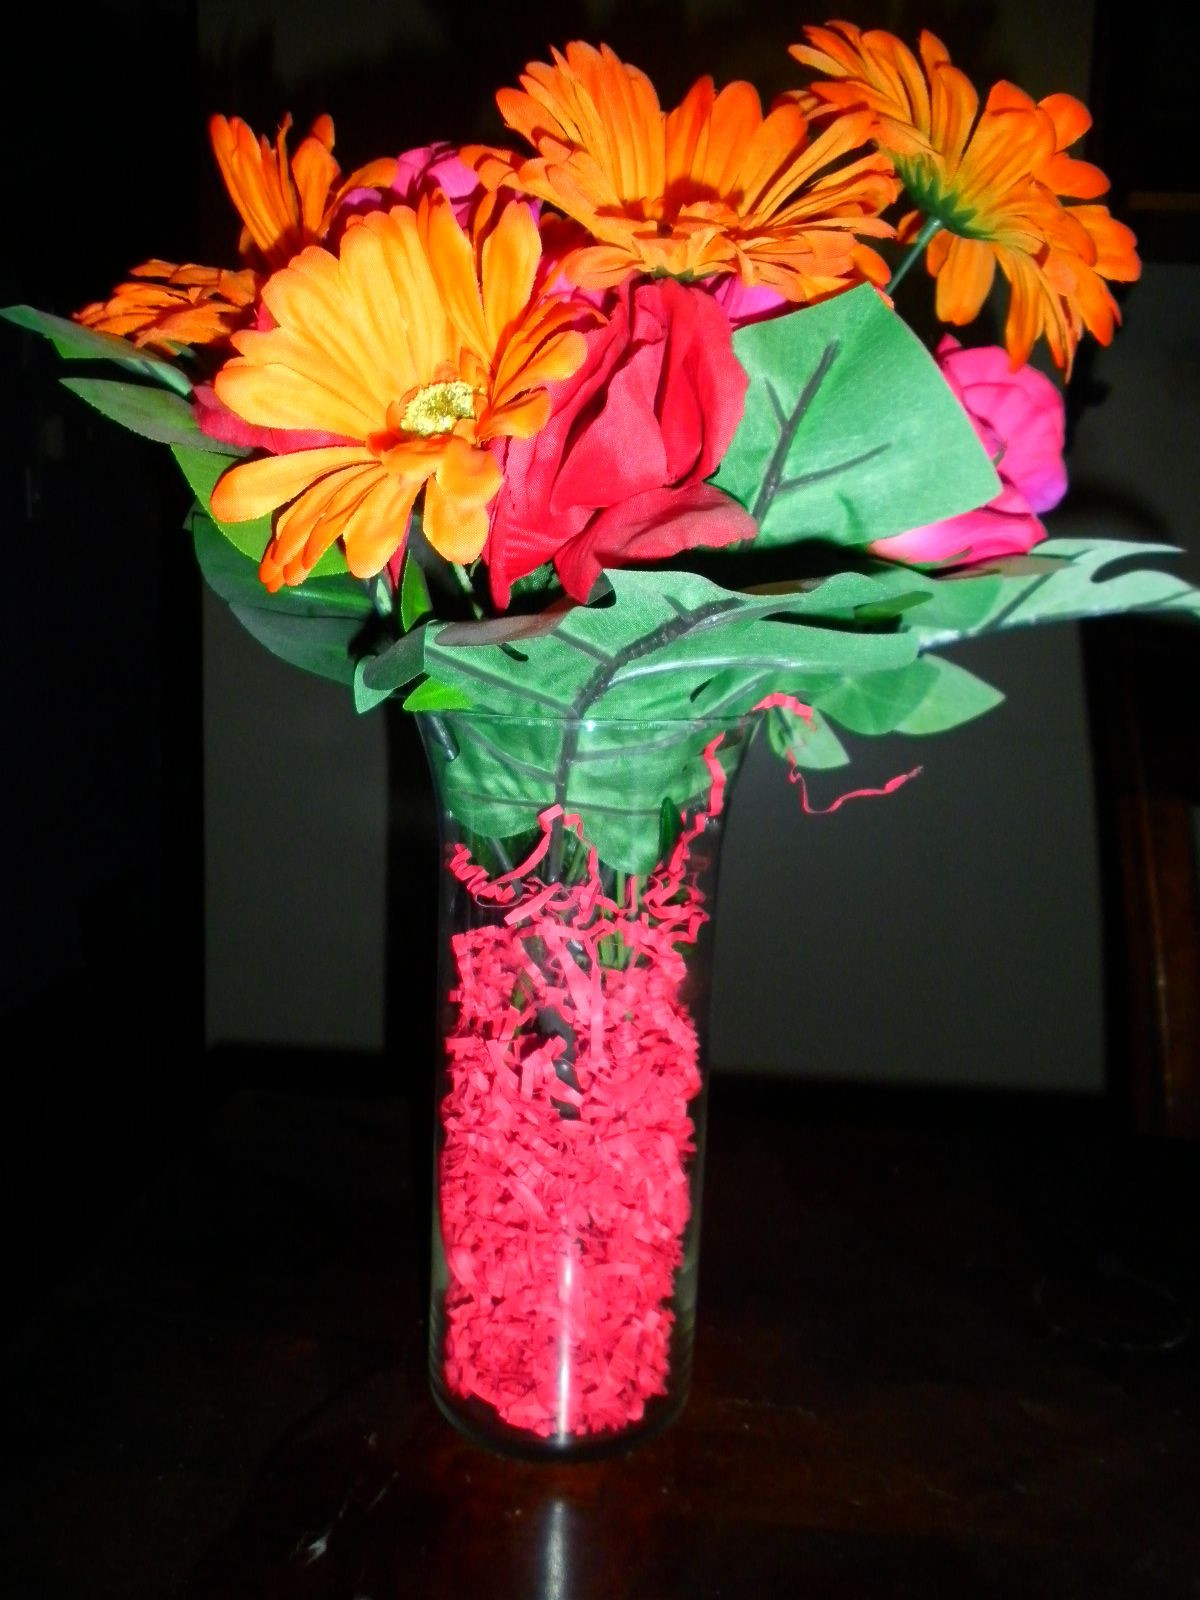 20 Stylish Fake Flower Vase Ideas 2024 free download fake flower vase ideas of flower vases flower vases pinterest inexpensive centerpieces with fun ways to make inexpensive centerpieces fake flowers and leaves with basket stuffing from a doll